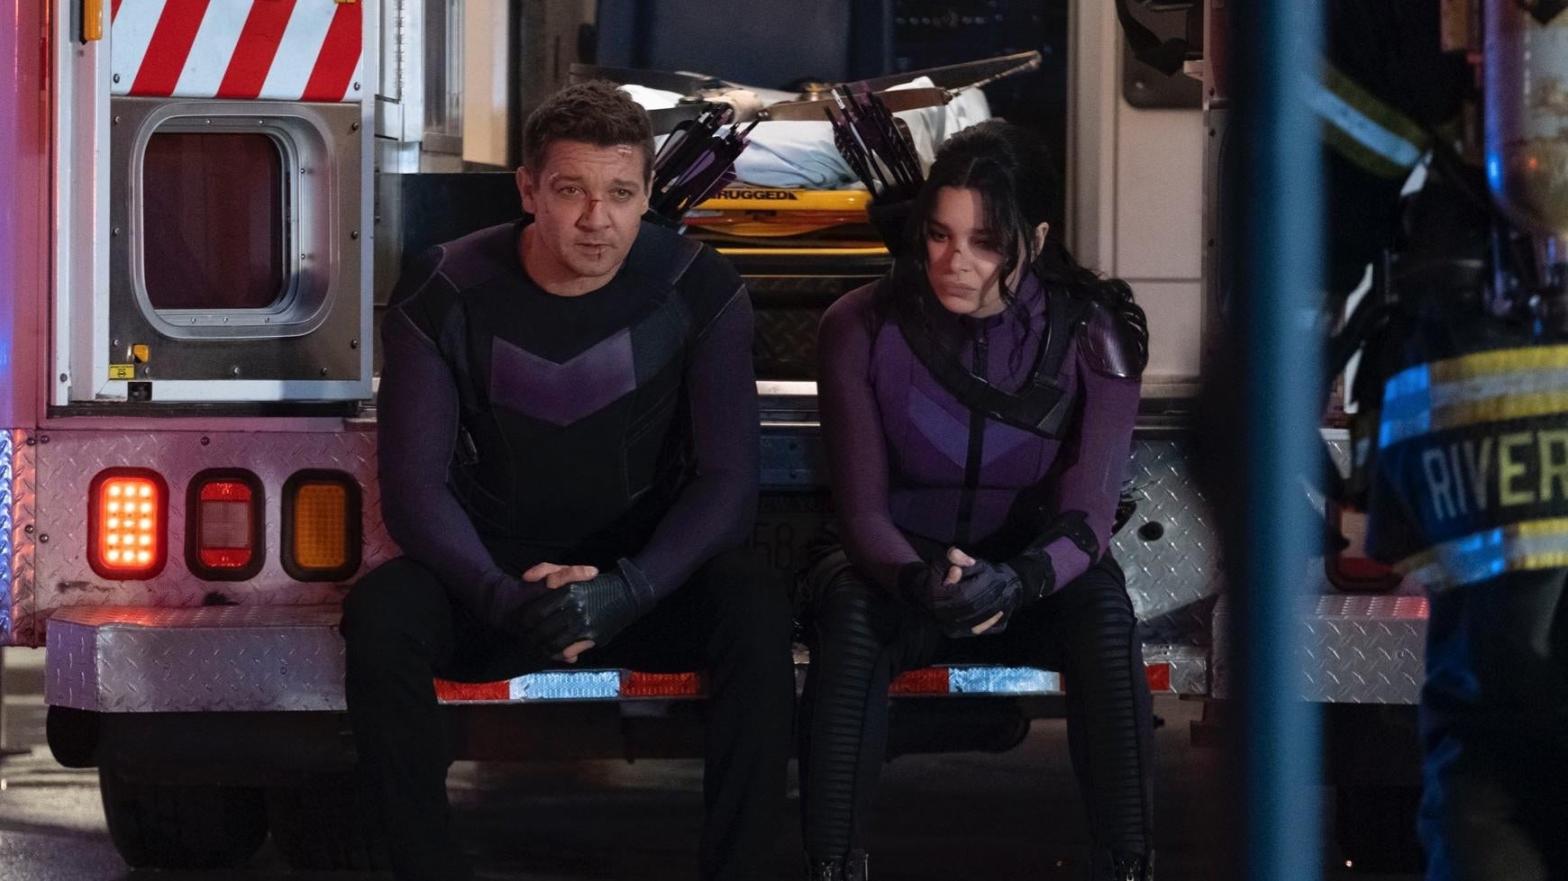 Clint and Kate at the end of their adventure. Or is it the beginning? (Image: Marvel Studios)